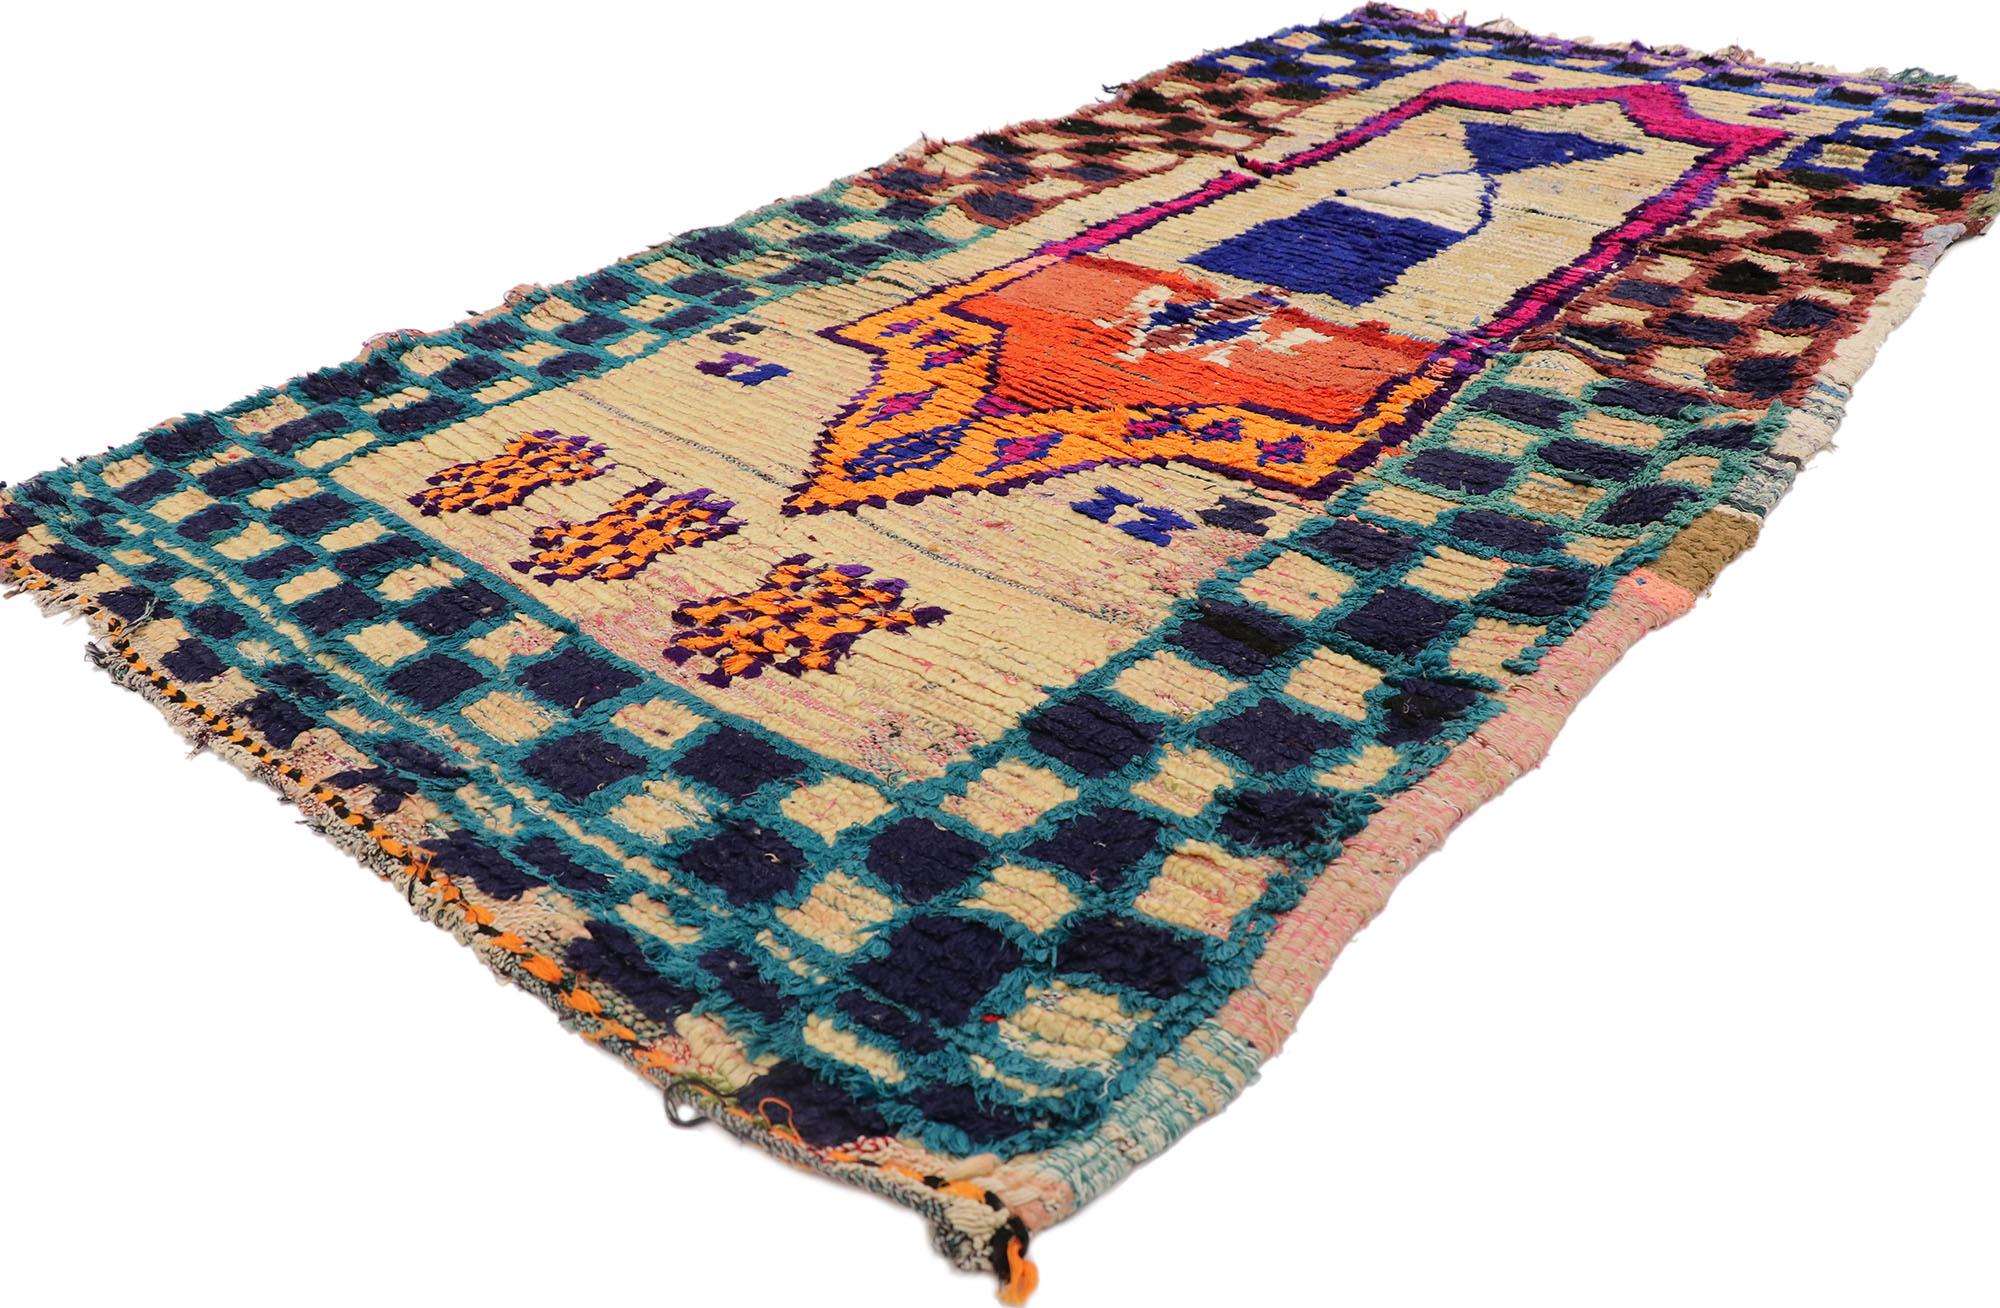 21569 Vintage Berber Moroccan Boucherouite rug with Boho Chic Tribal Style 03'11 x 07'10. Showcasing a bold expressive tribal design, incredible detail and texture, this hand knotted cotton and wool vintage Berber Boucherouite Moroccan rug is a